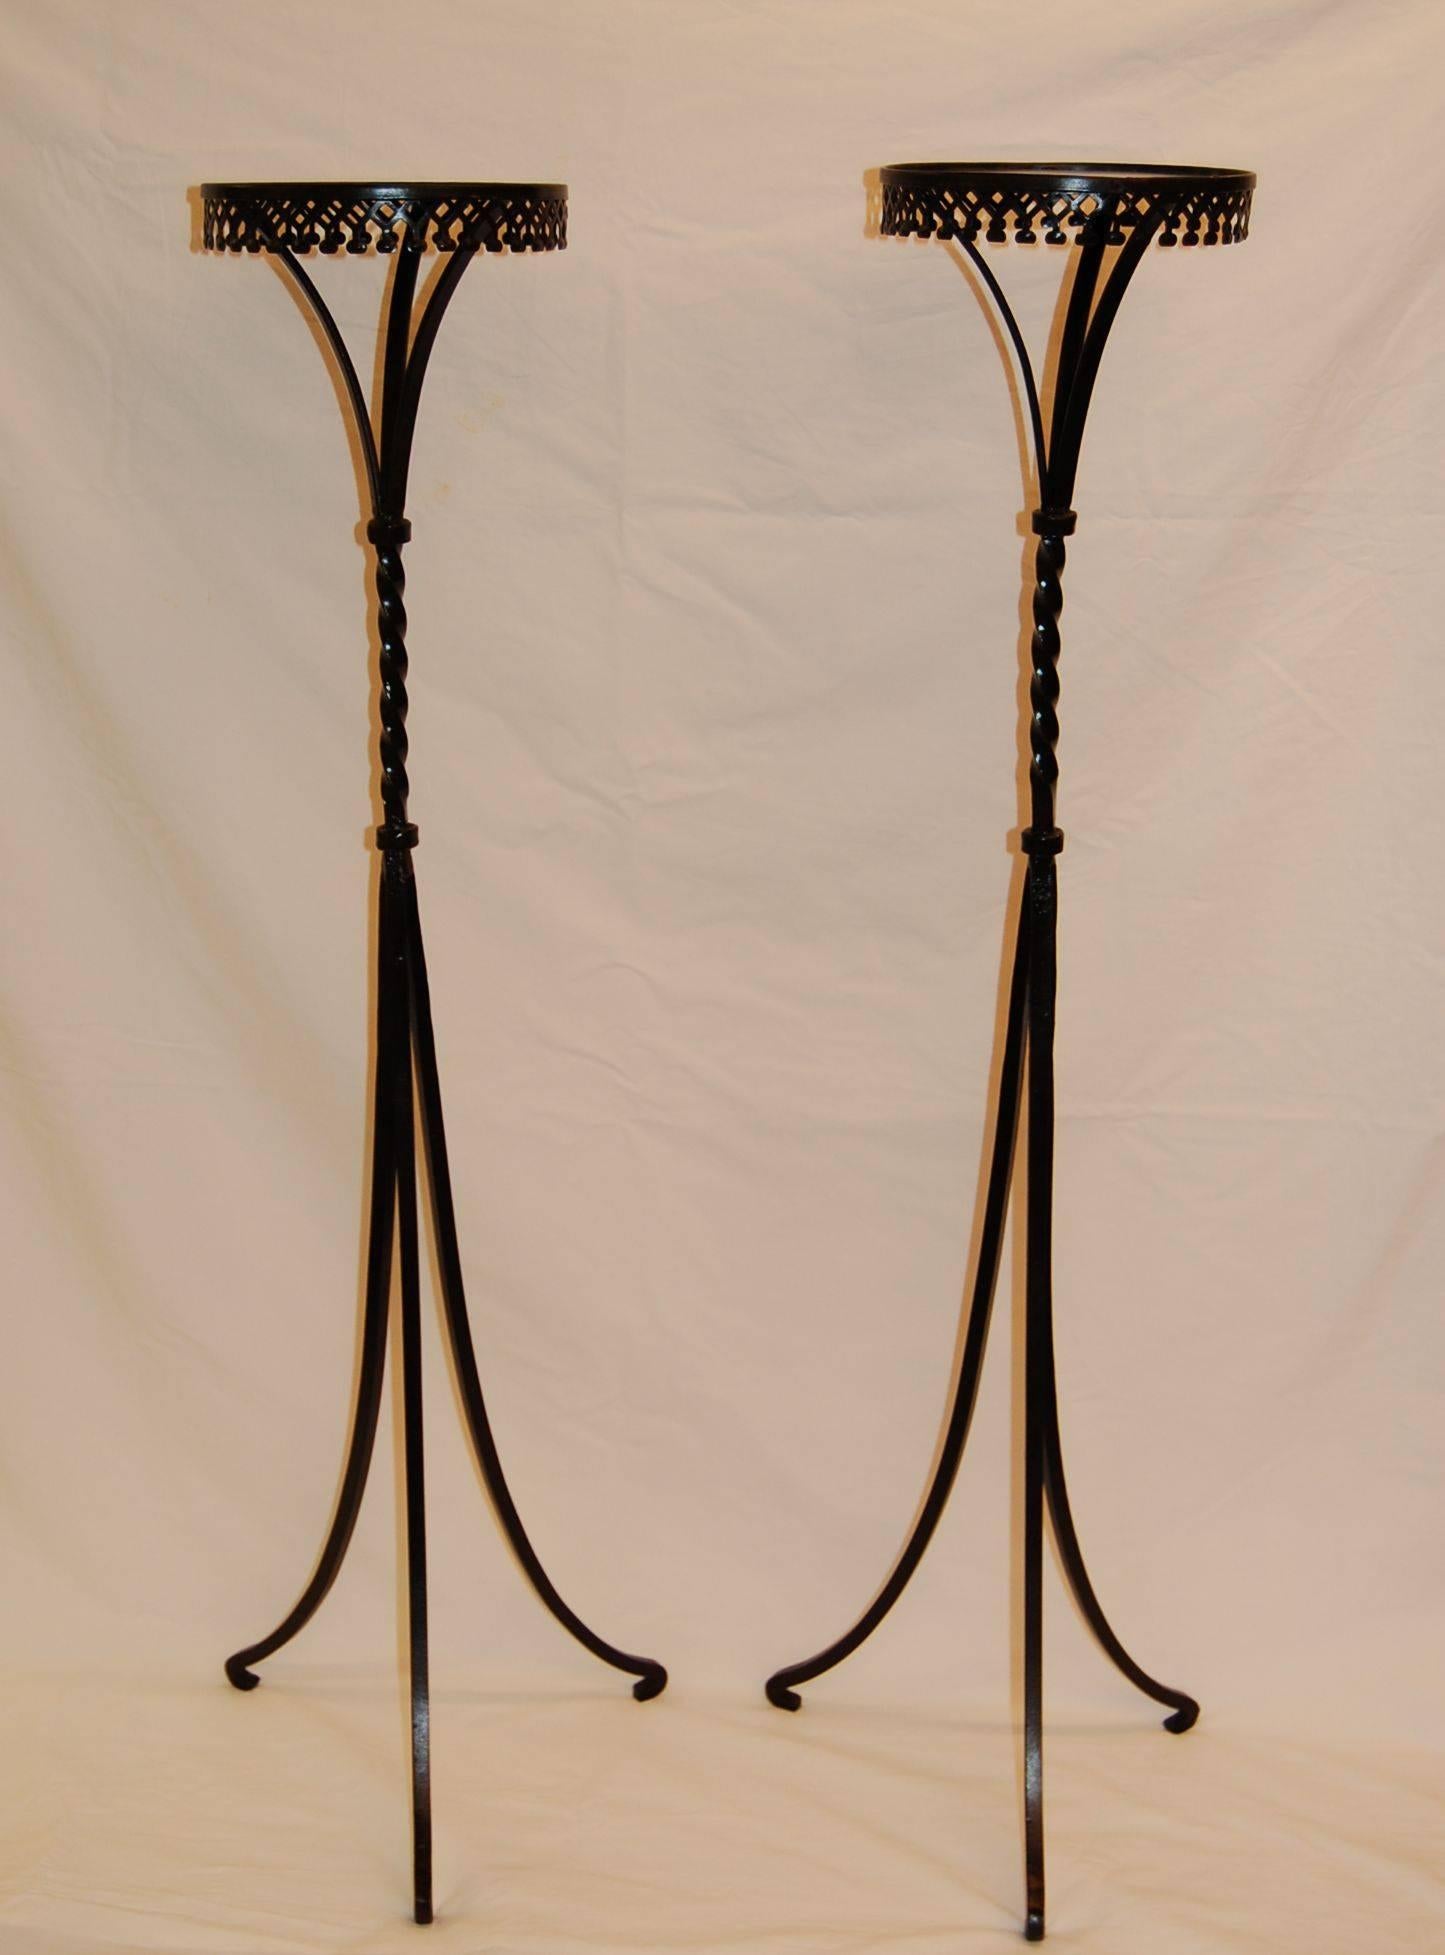 Pair of iron plant stands or pedestals constructed of solid steel with decorative steel cut-out trim around the top edge.